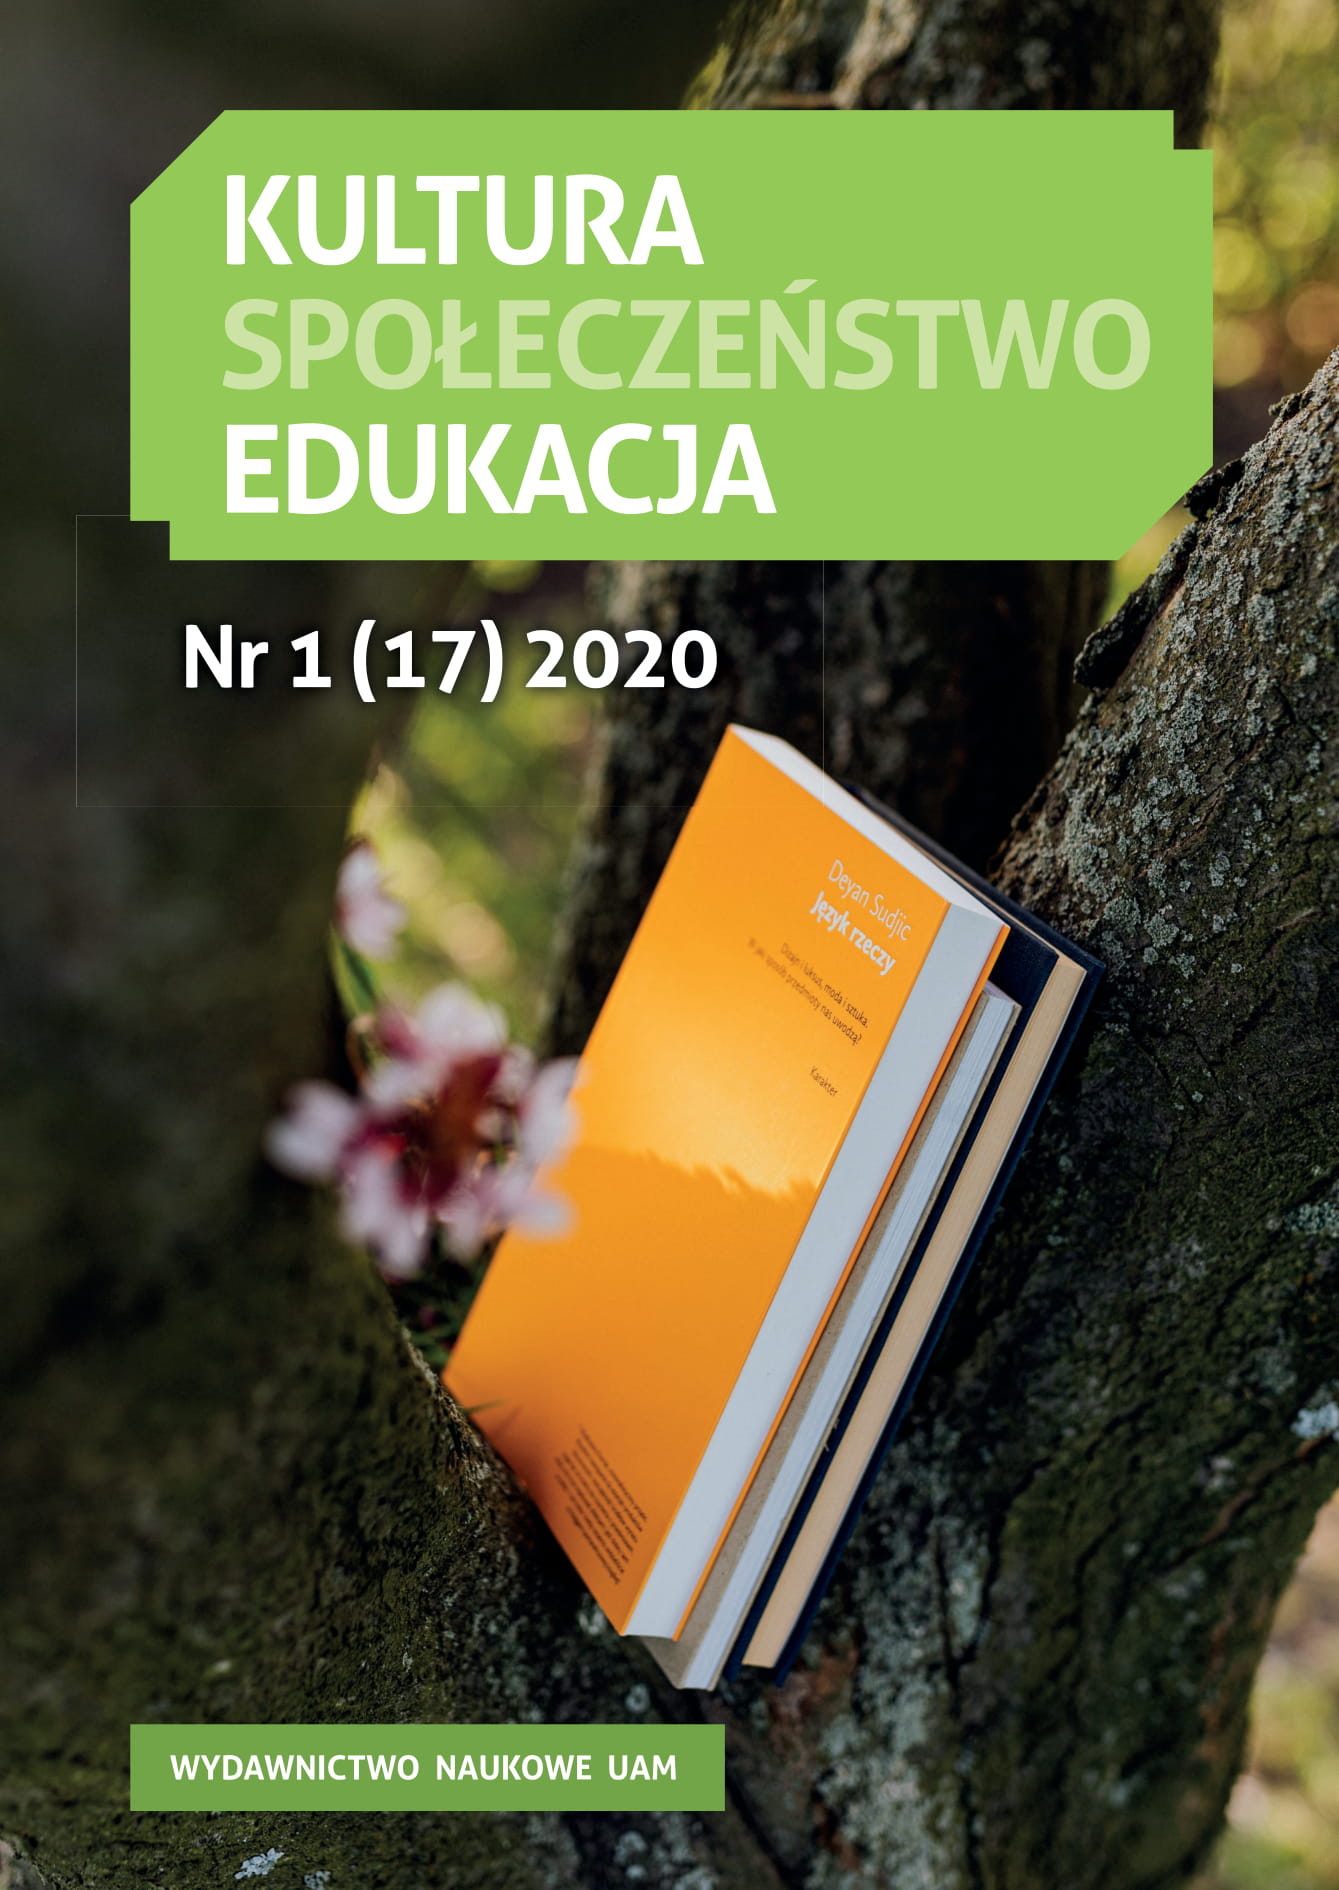 Political and scientific support
for the establishment of the Veterinary School in Lwów Cover Image